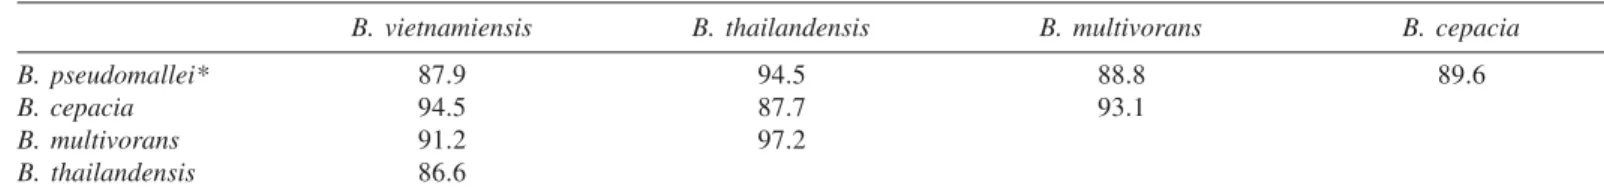 Table of percentage identity between studied Burkholderia species of the phaC gene fragment